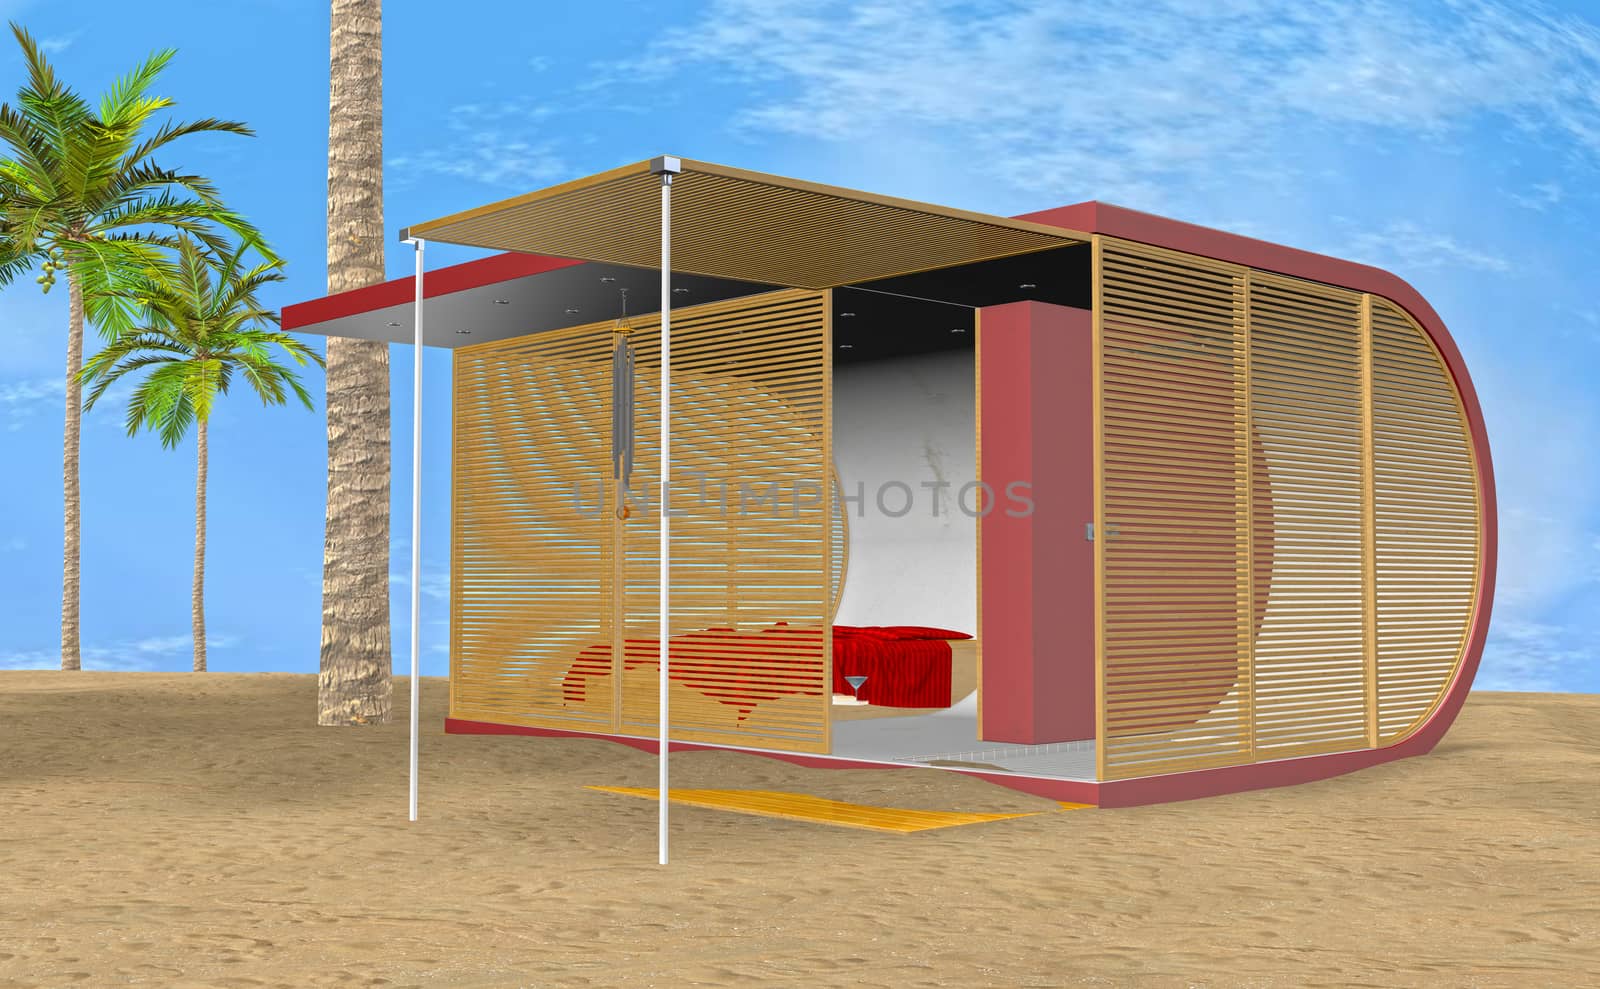 3D illustration of a beach bungalow on a blue sky and gree palm trees background